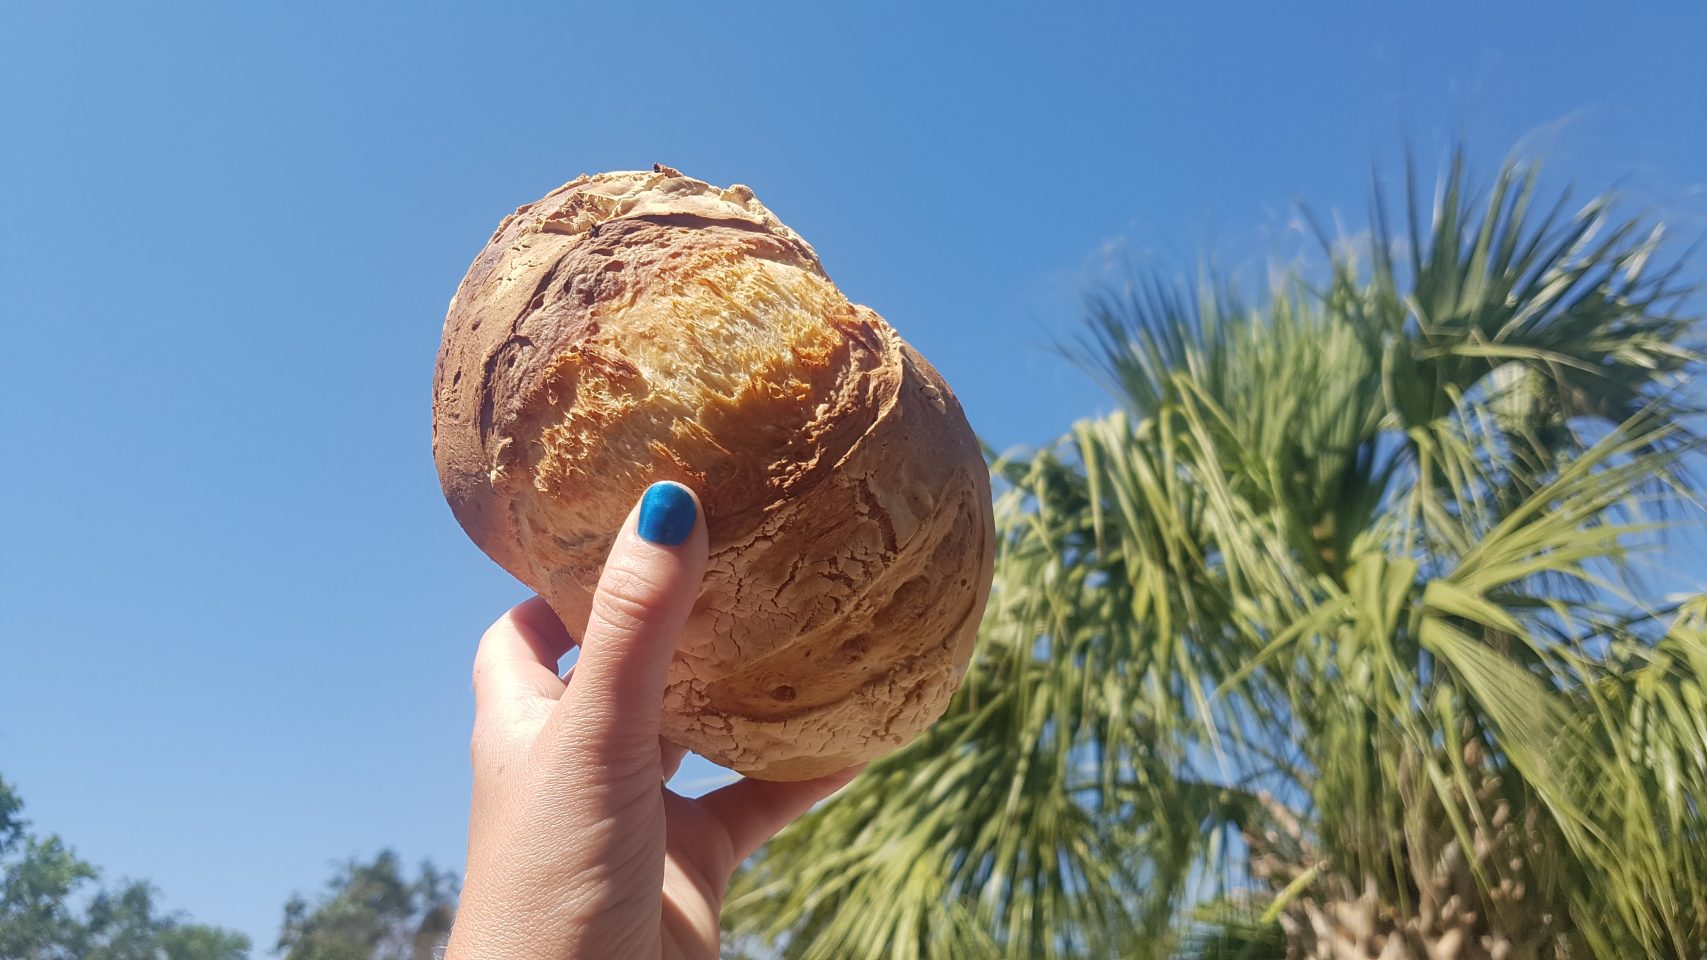 Hand with blue fingernails holding a bread roll against a backdrop of a blue sky and a palm tree